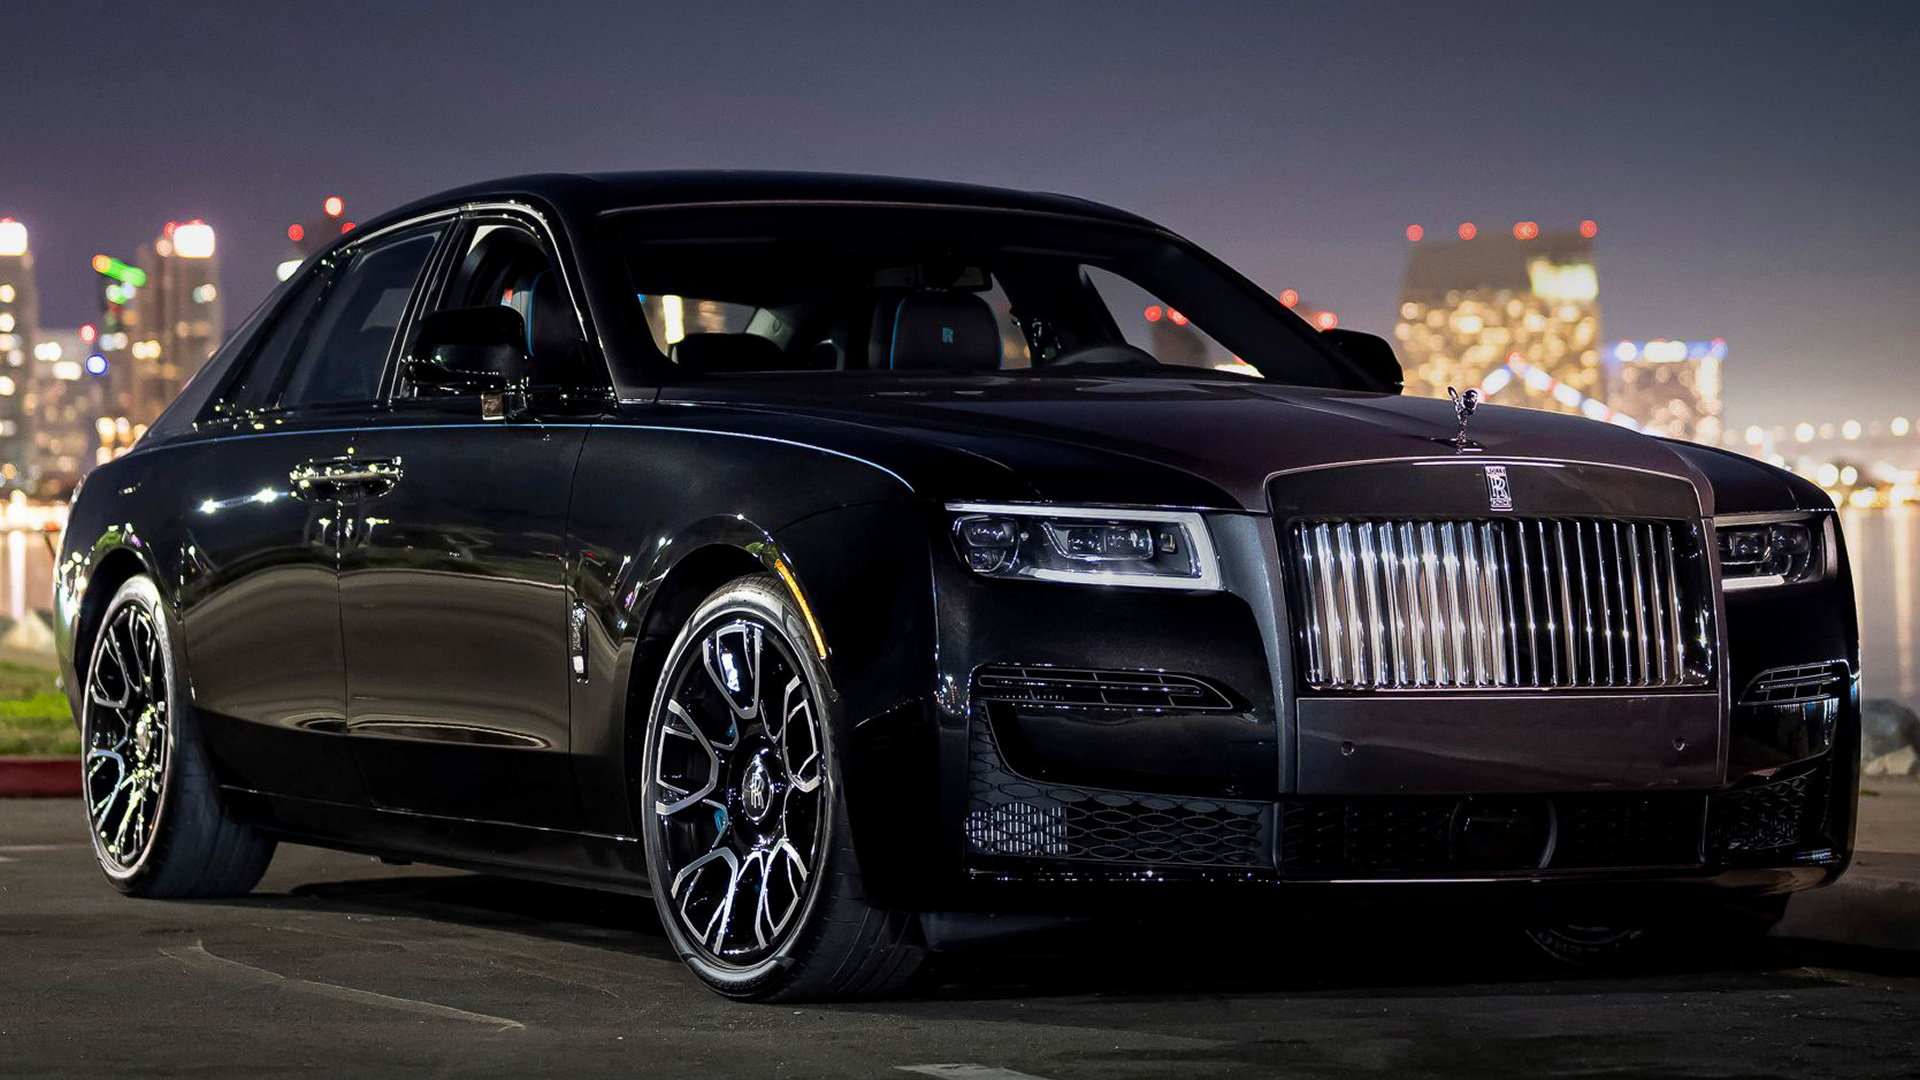 2022 RollsRoyce Ghost Black Badge (US) Wallpapers and HD Images